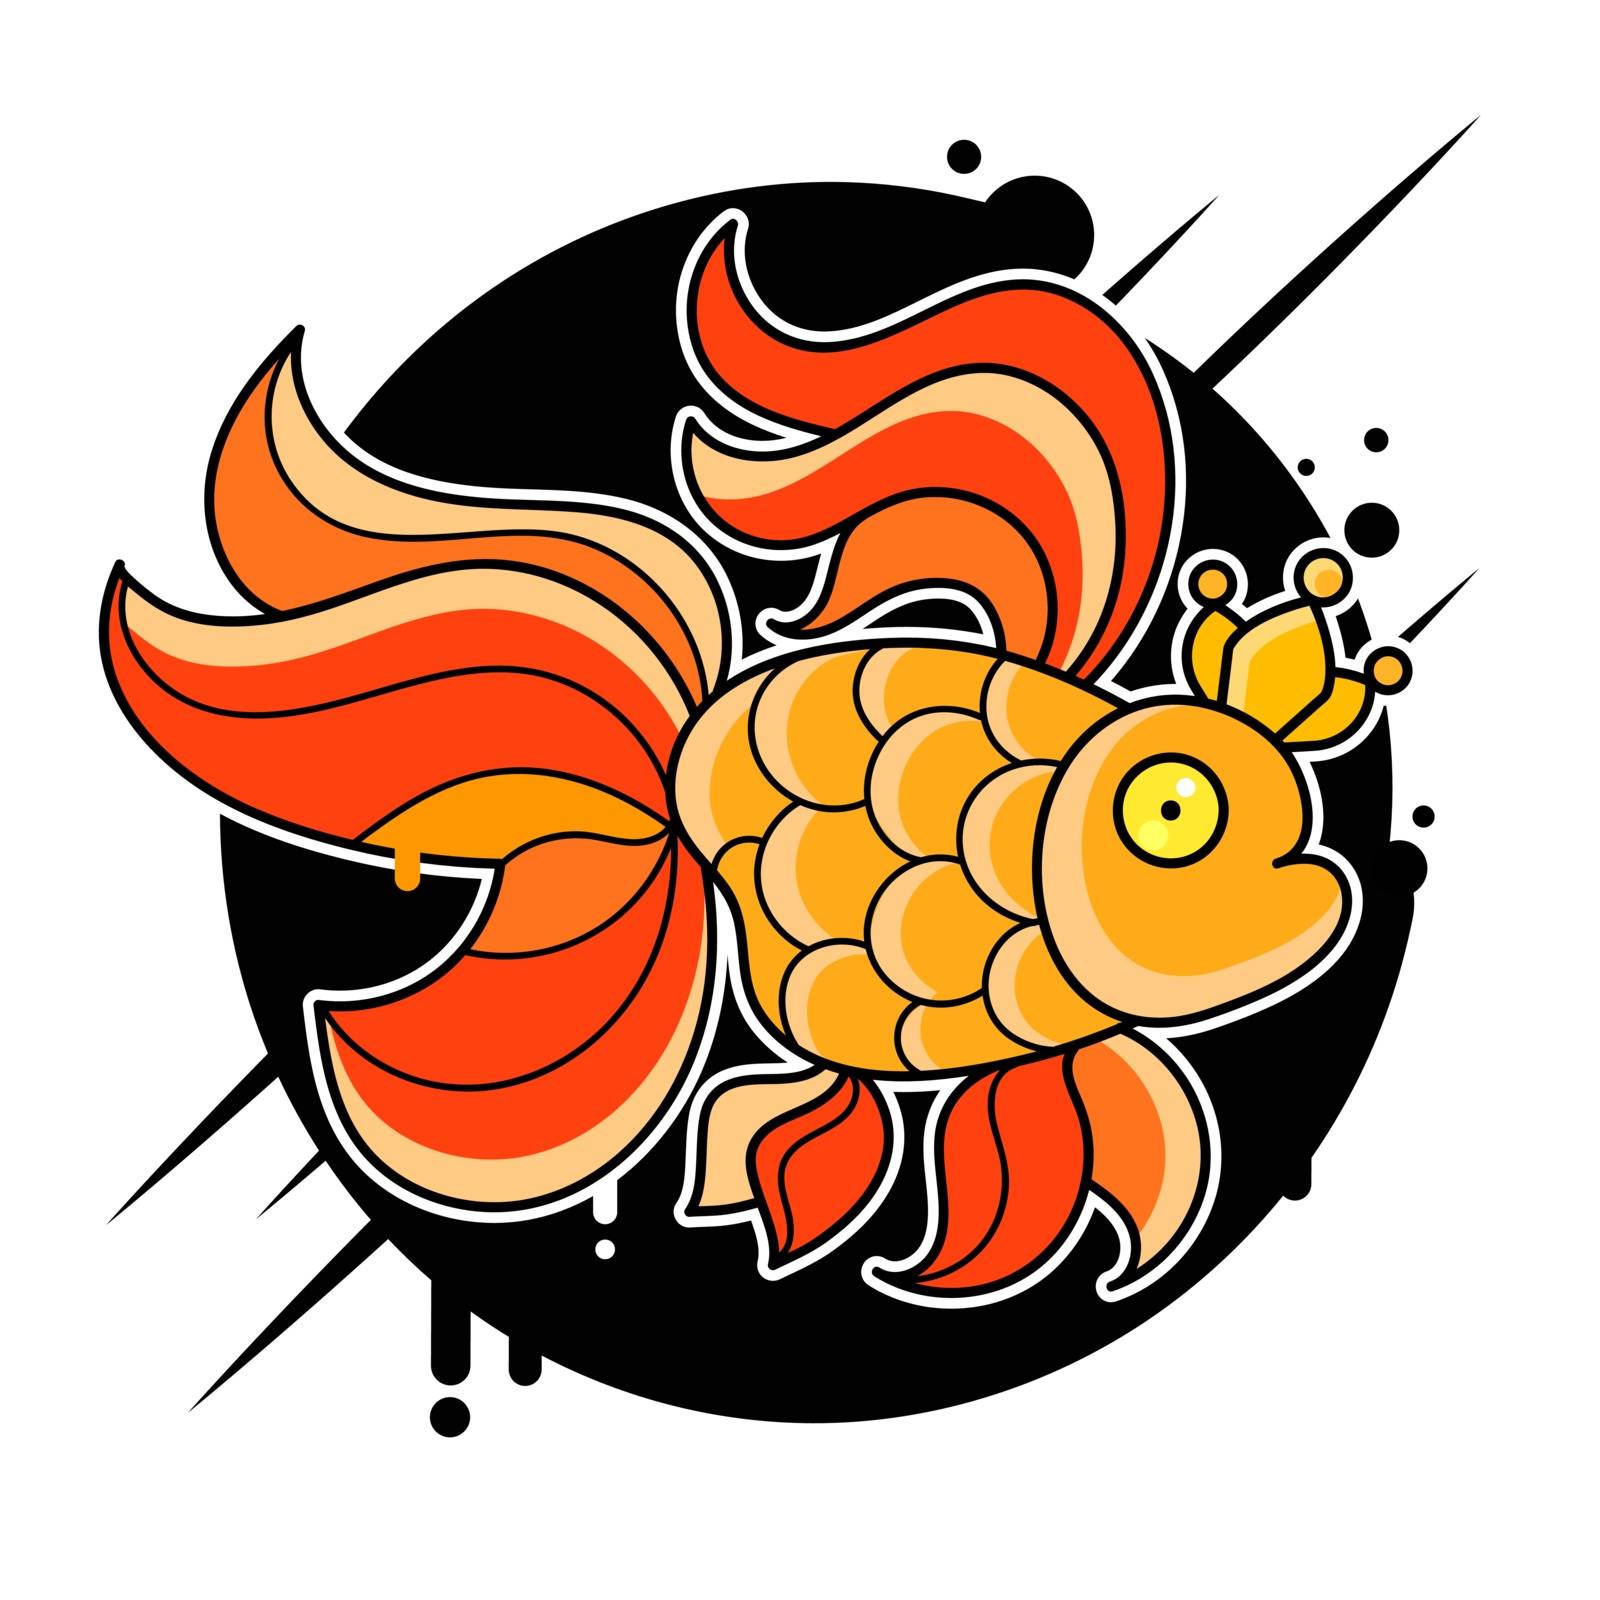 Gold Fish Logo Vector Illustration Suitable For Greeting Card, Poster Or T-shirt Printing.